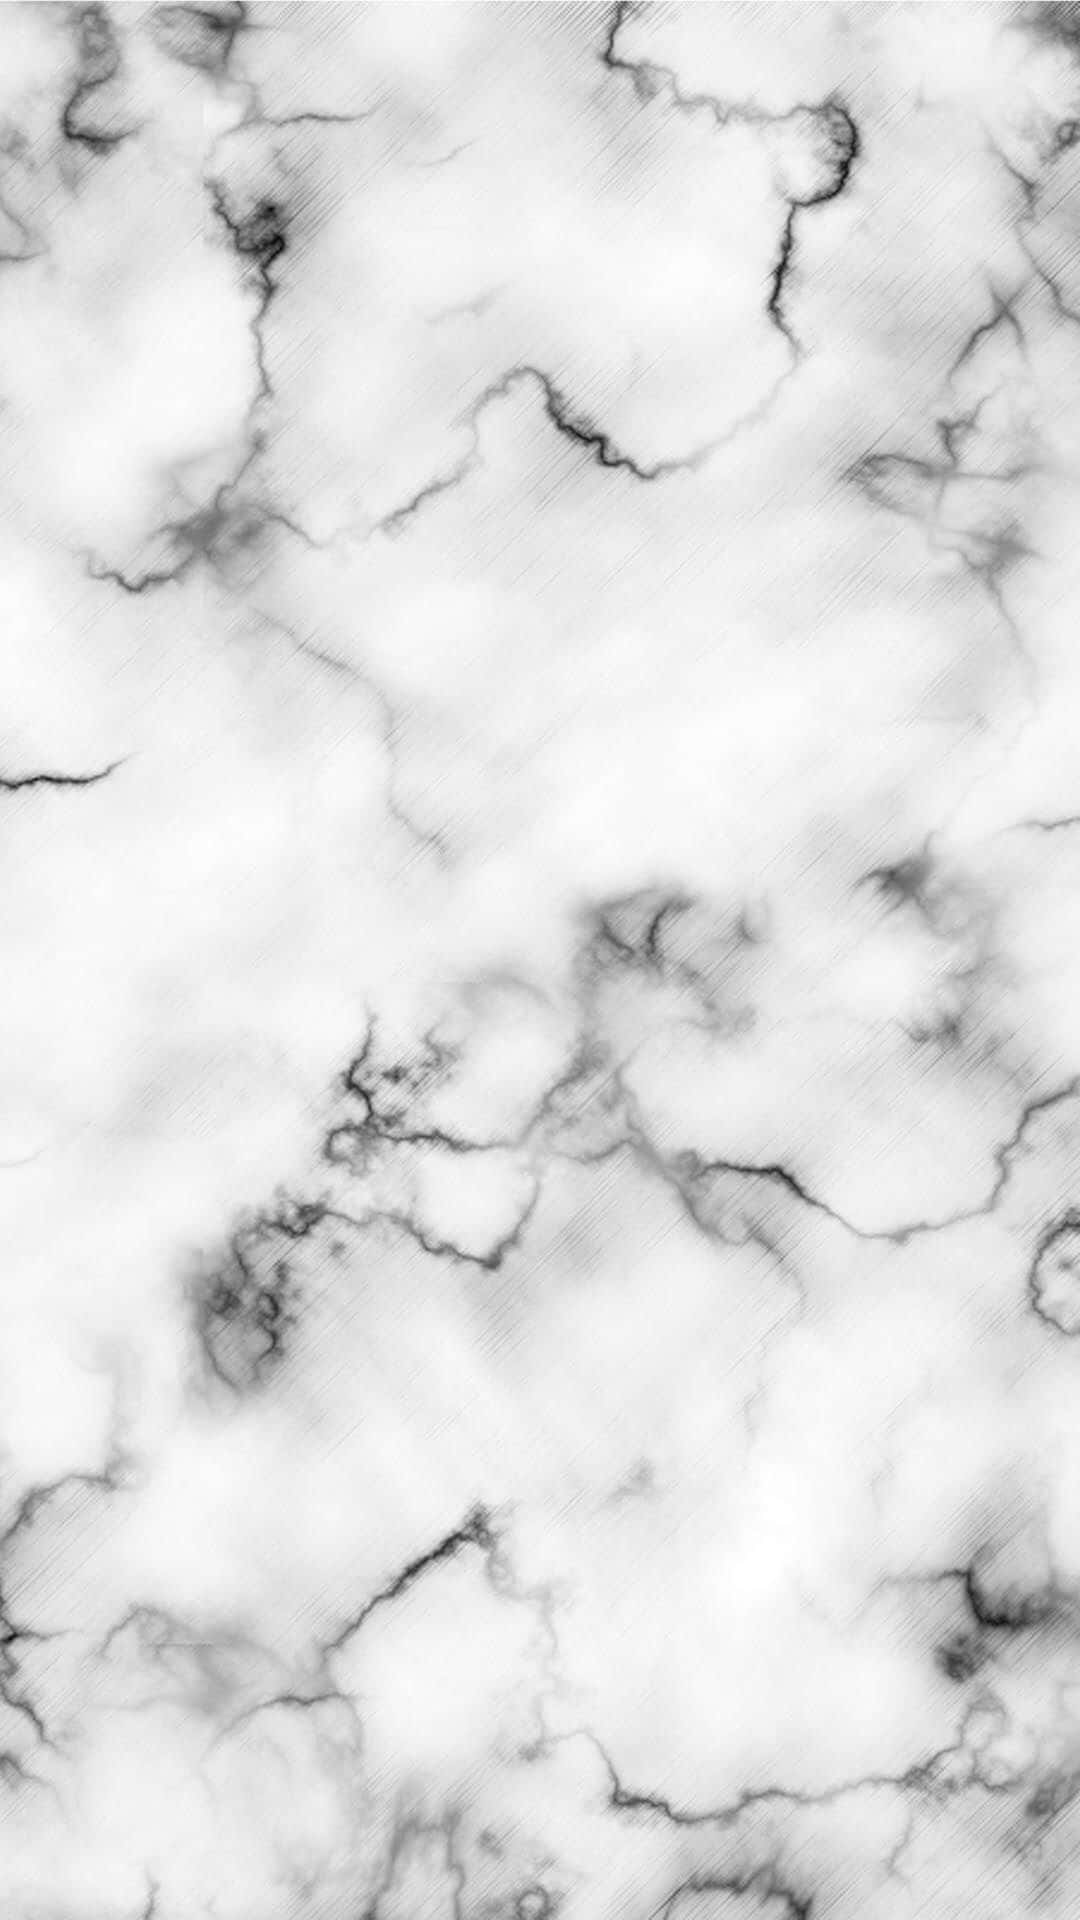 Elegant Marble iPhone Wallpaper for a Classy Touch